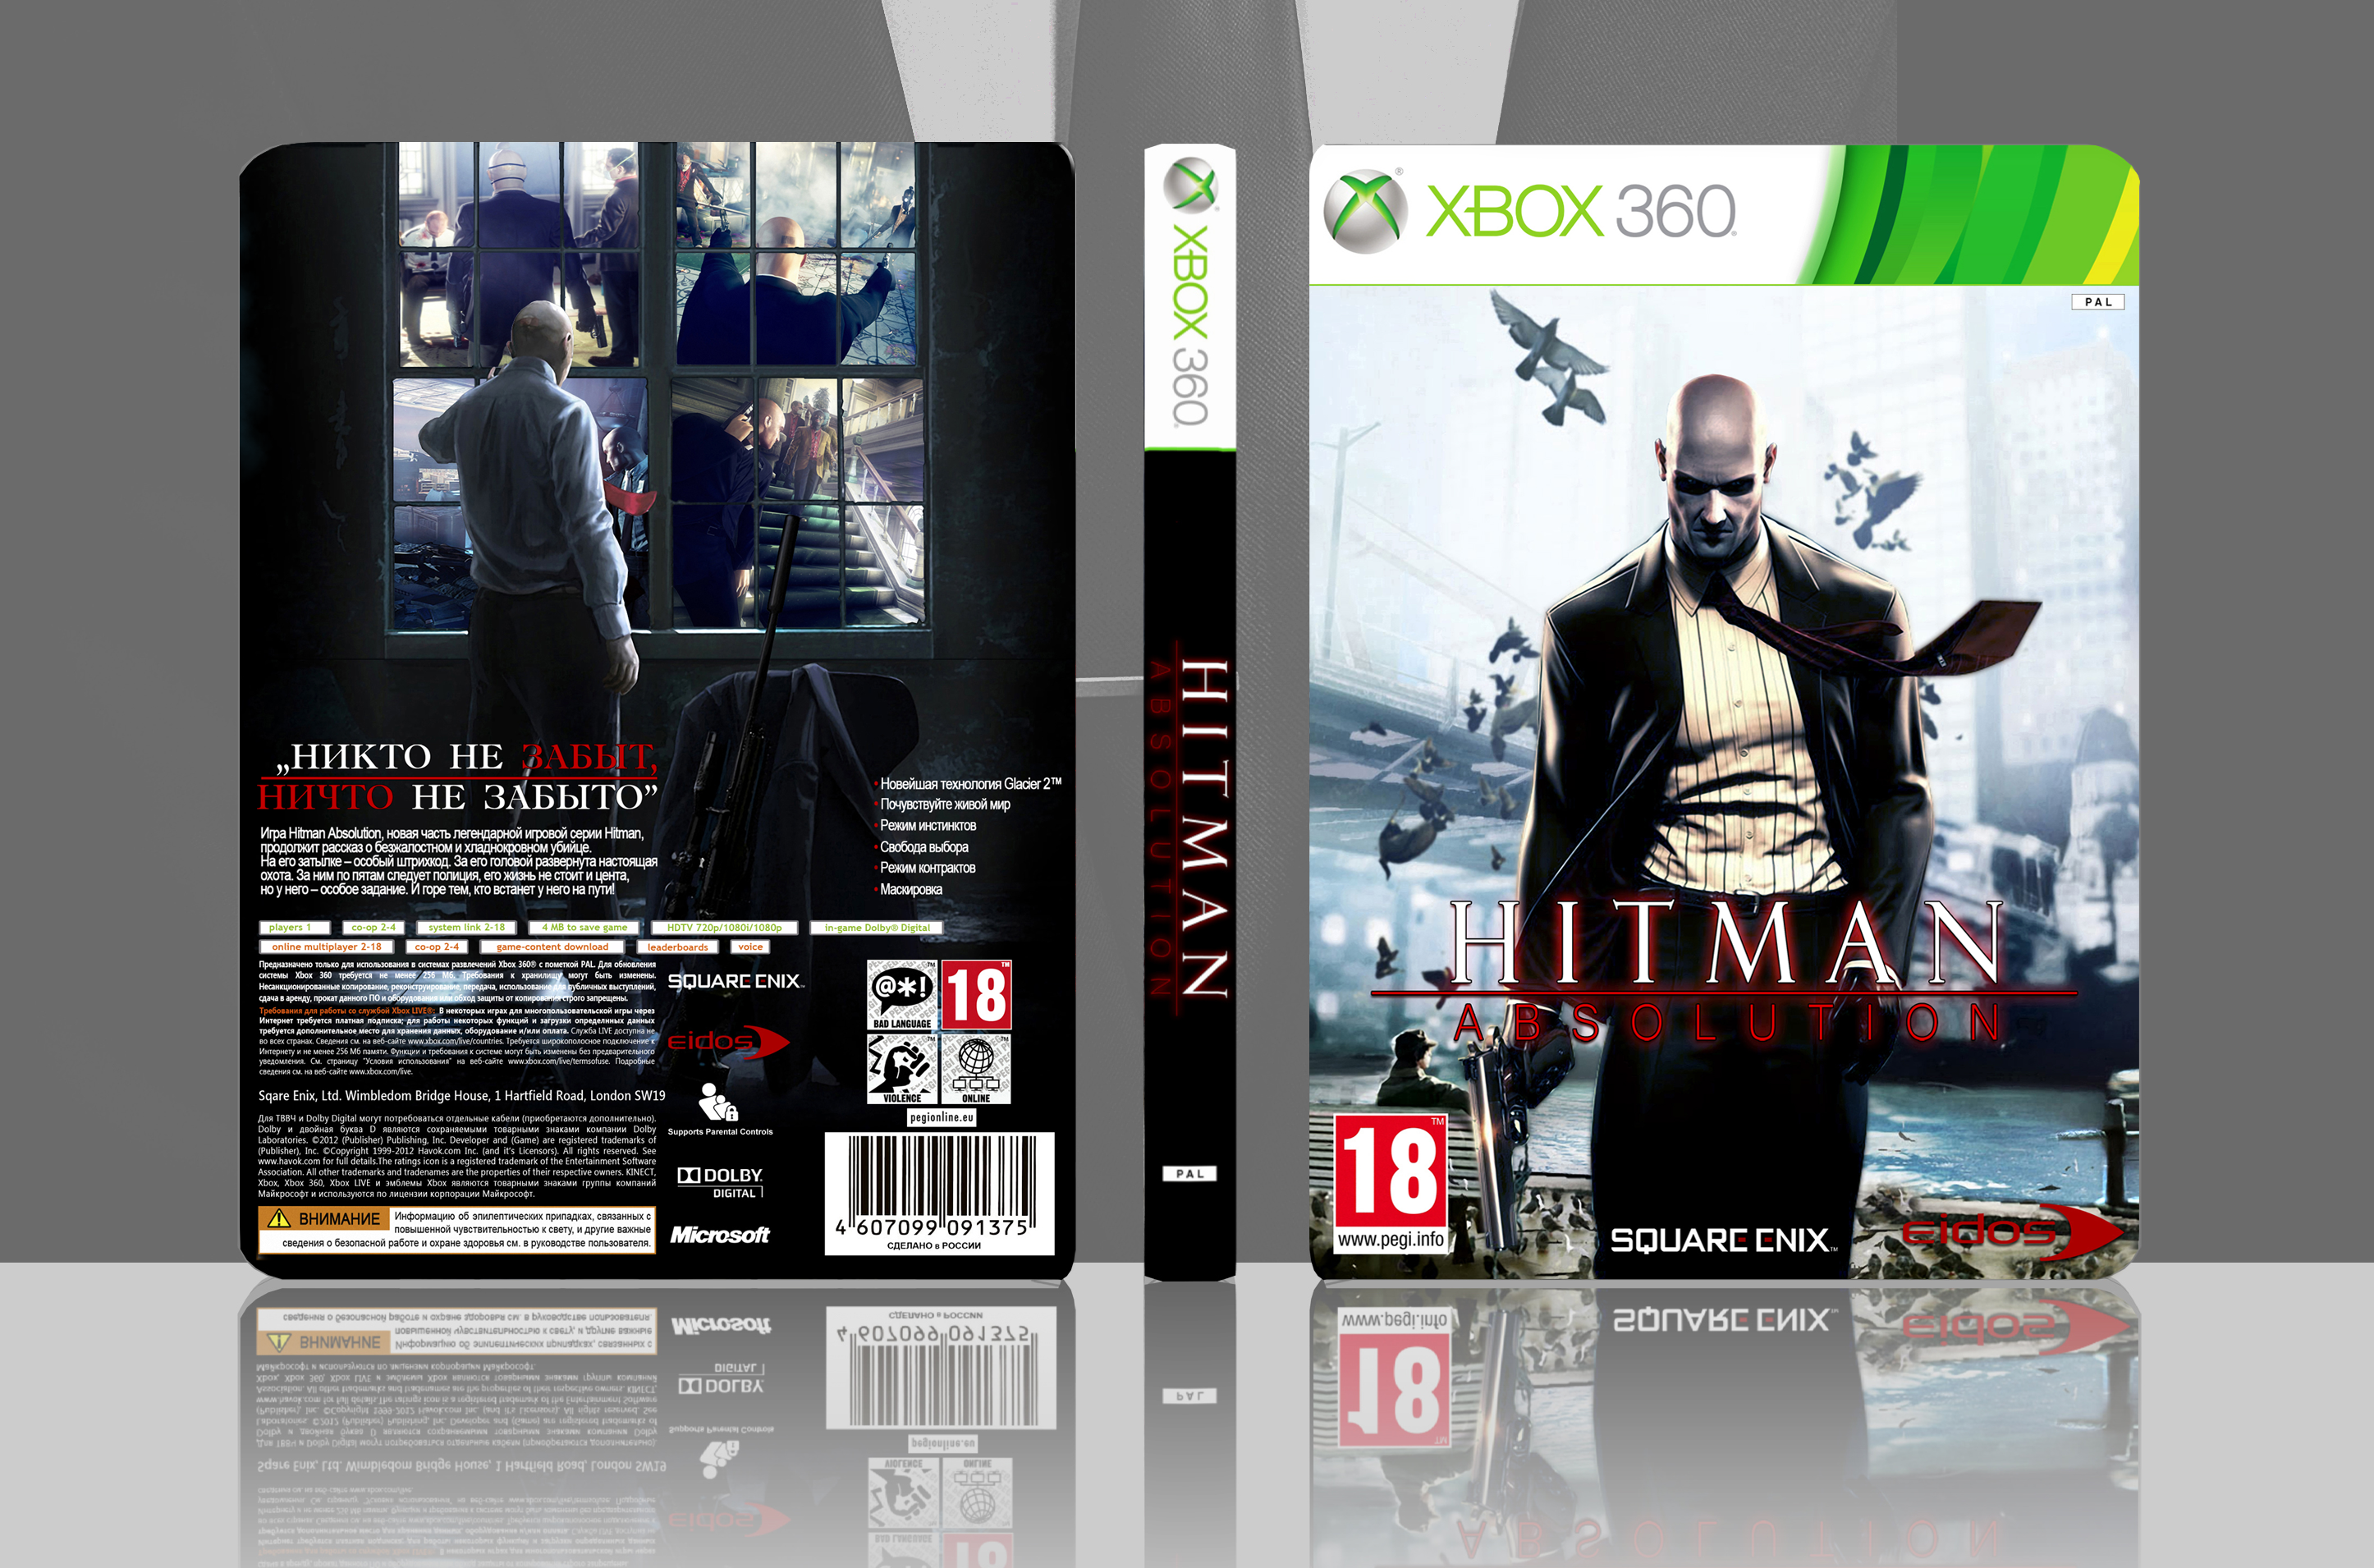 download hitman absolution xbox one for free